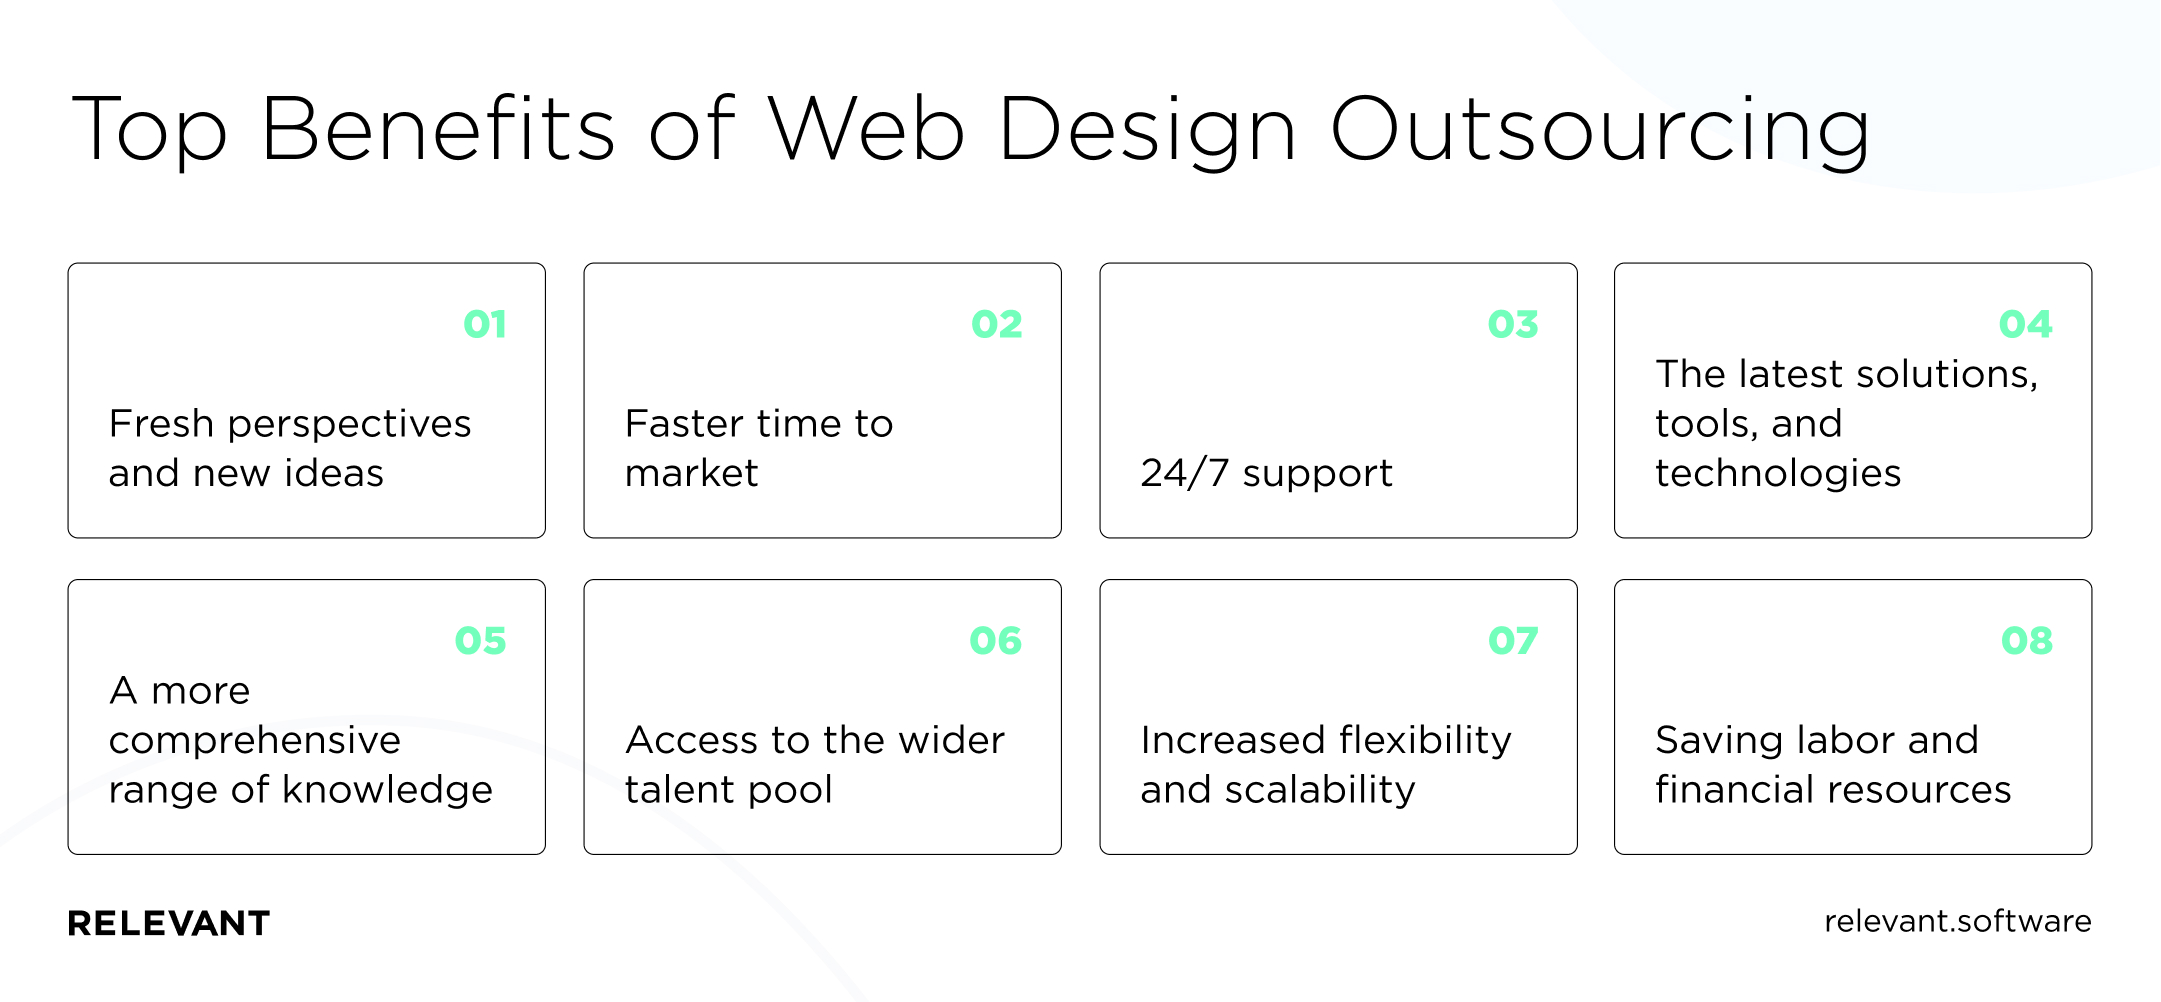 Top benefits of Web Design Outsourcing